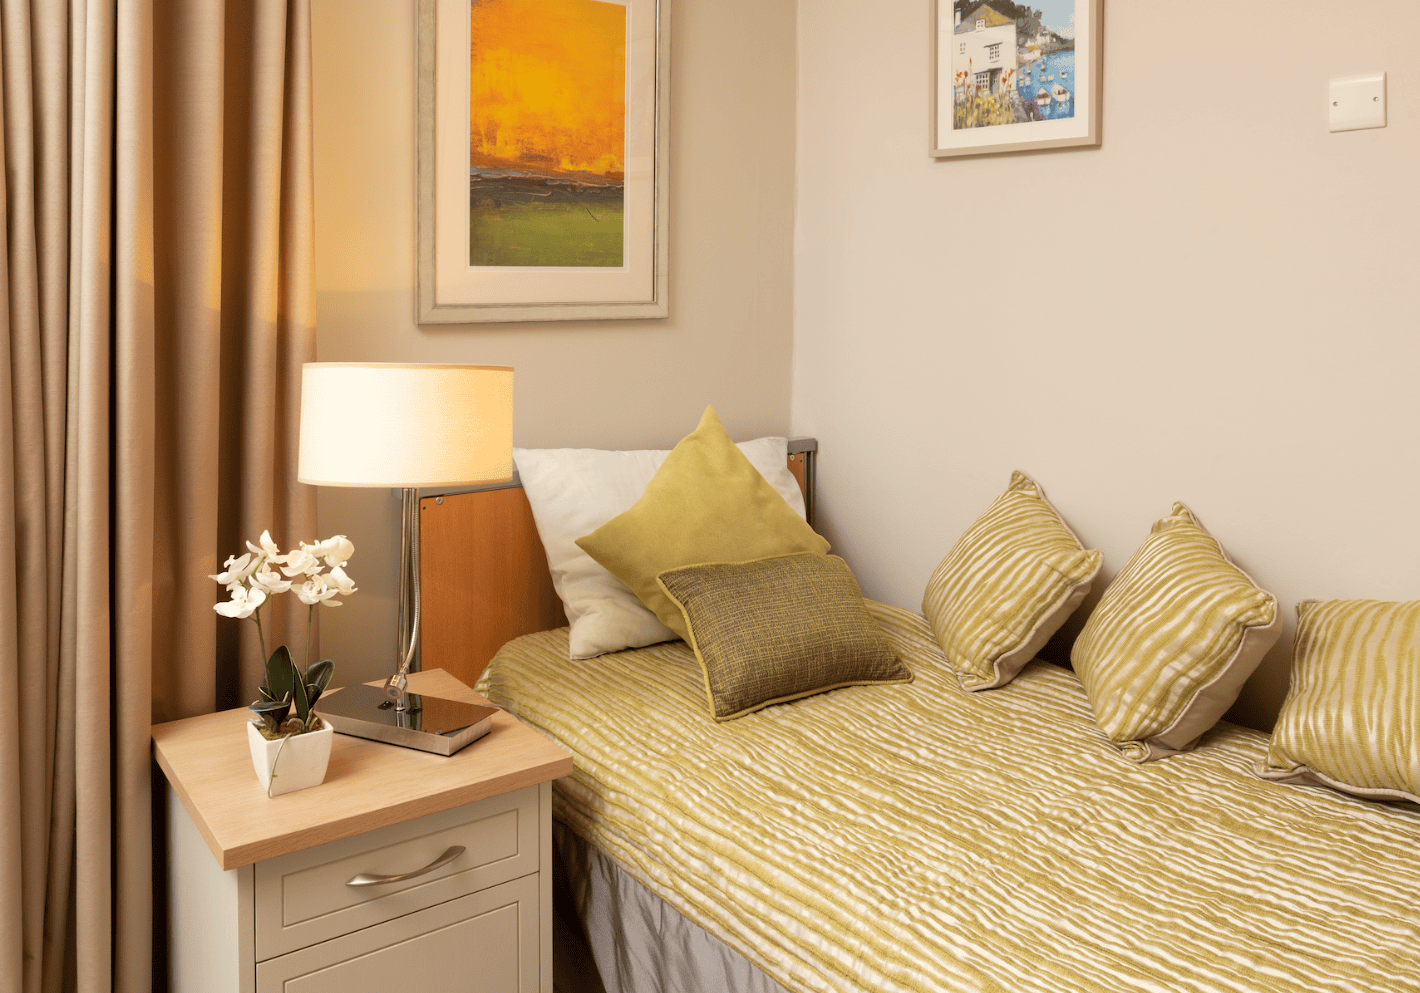 Bedroom of Kettlewell House care home in Woking, Surrey